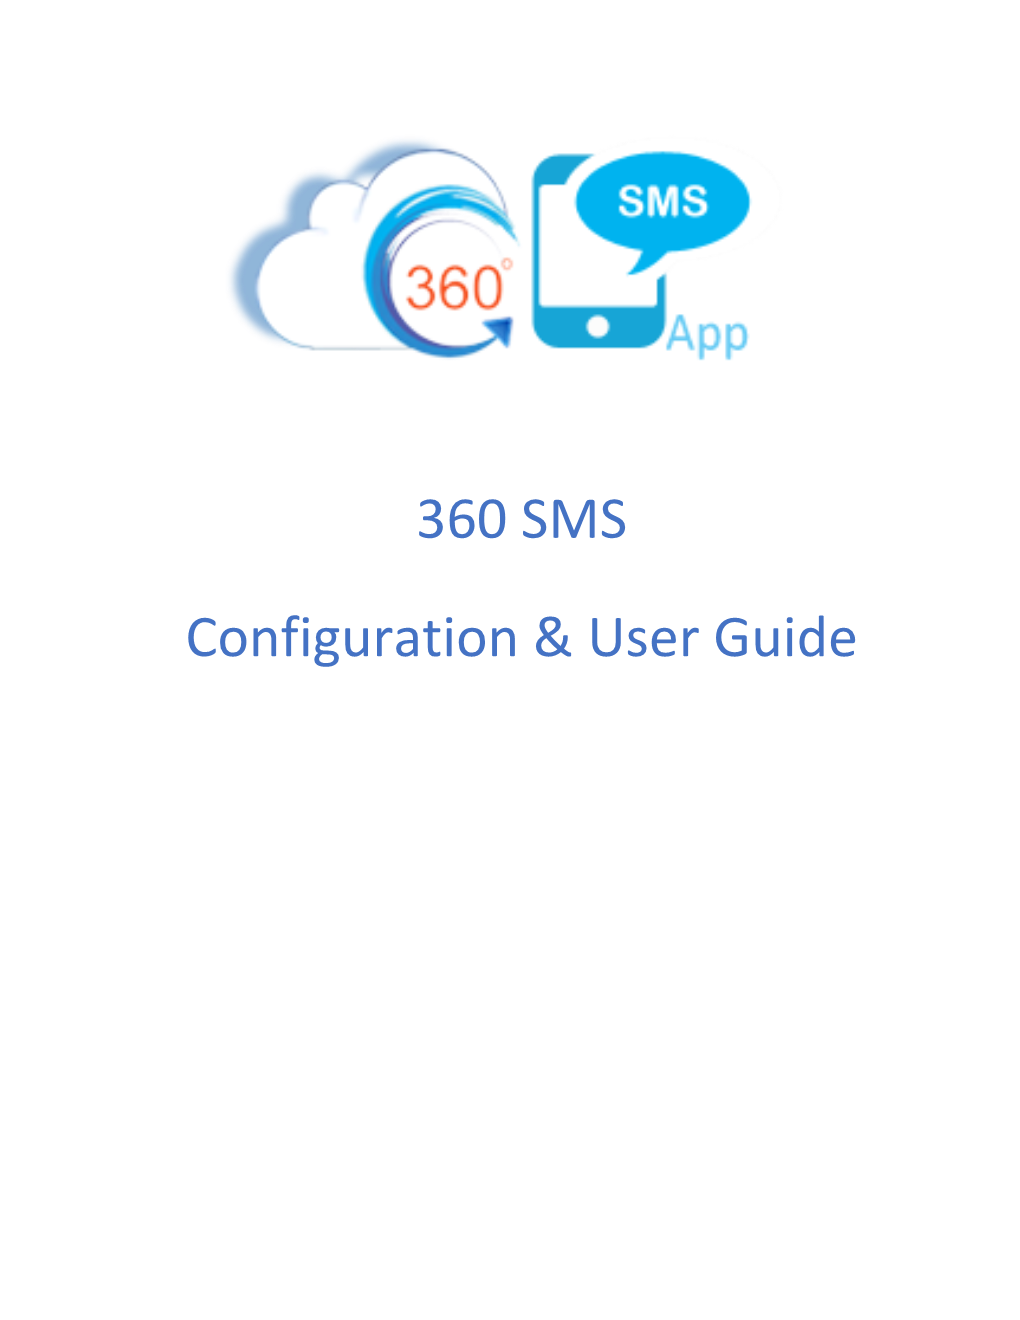 Download 360 SMS App Configuration & User Guide